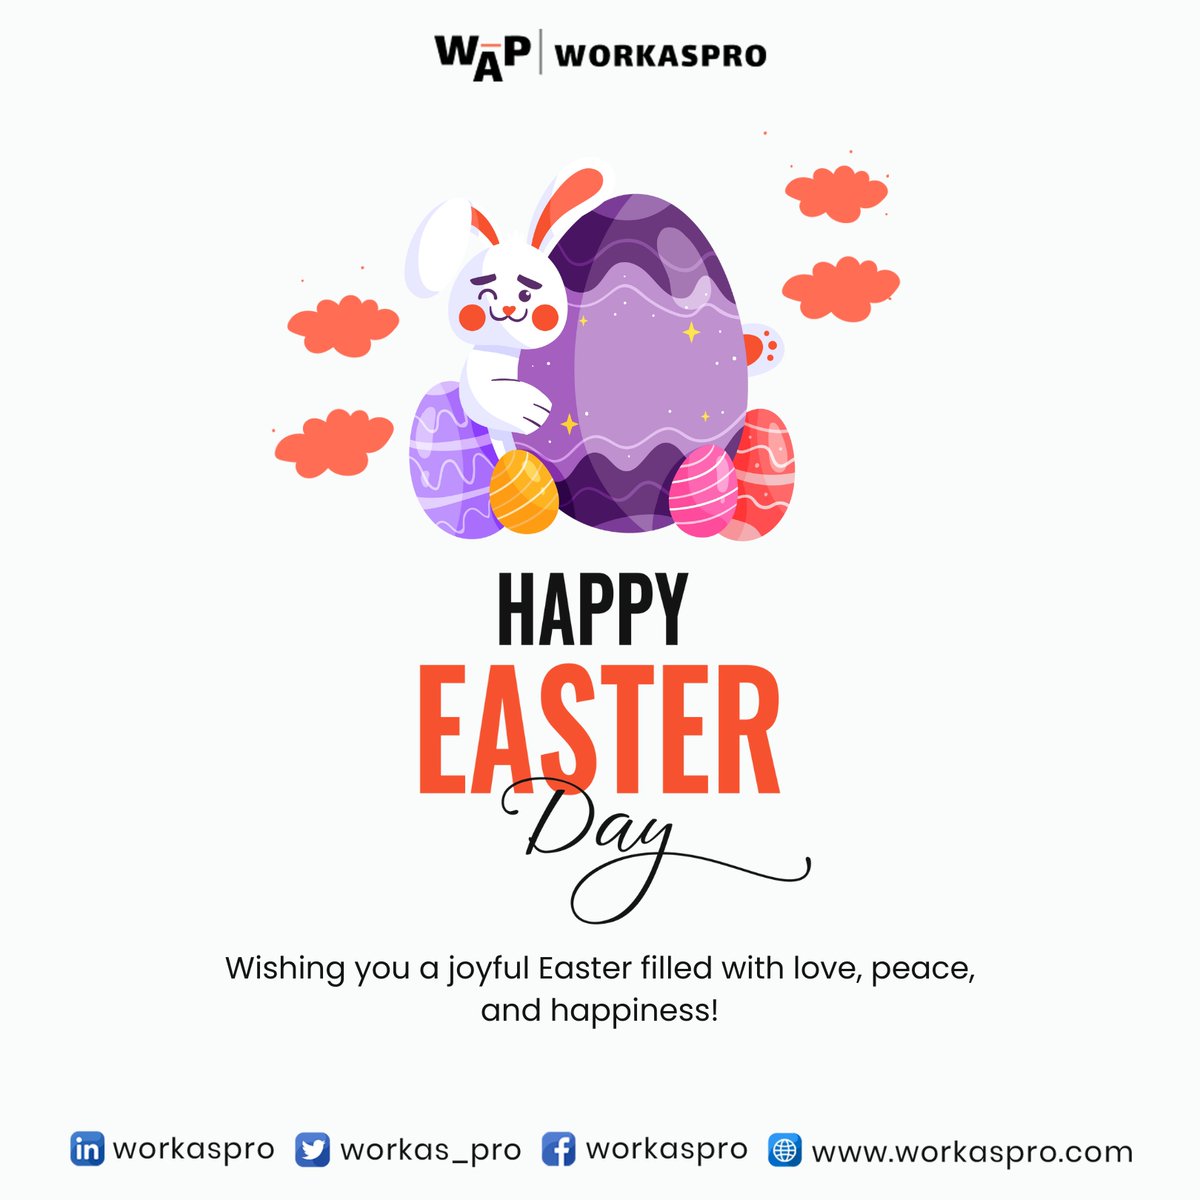 HAPPY EASTER DAY! Wishing you a joyful Easter filled with love, peace, and happiness. ❤️ ❤️

#WorkAsPro #blockchain #freelance #platform #Easter #Happyday #Wishing #joyful #love #peace #happiness